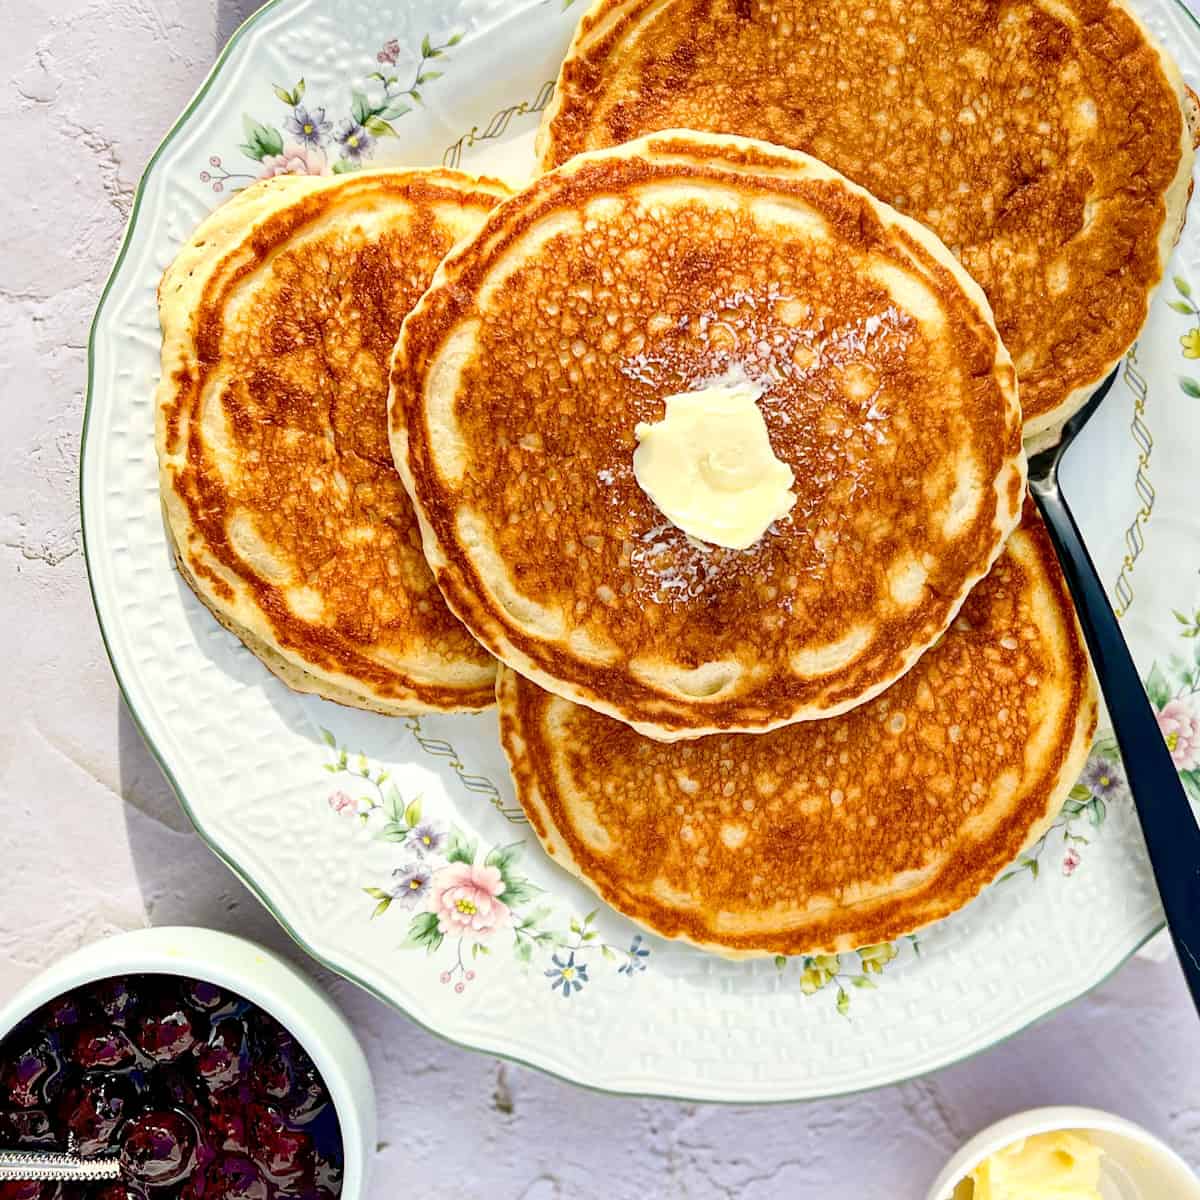 3 pancakes on a flowered plate with butter and syrup and a black serving spatula.